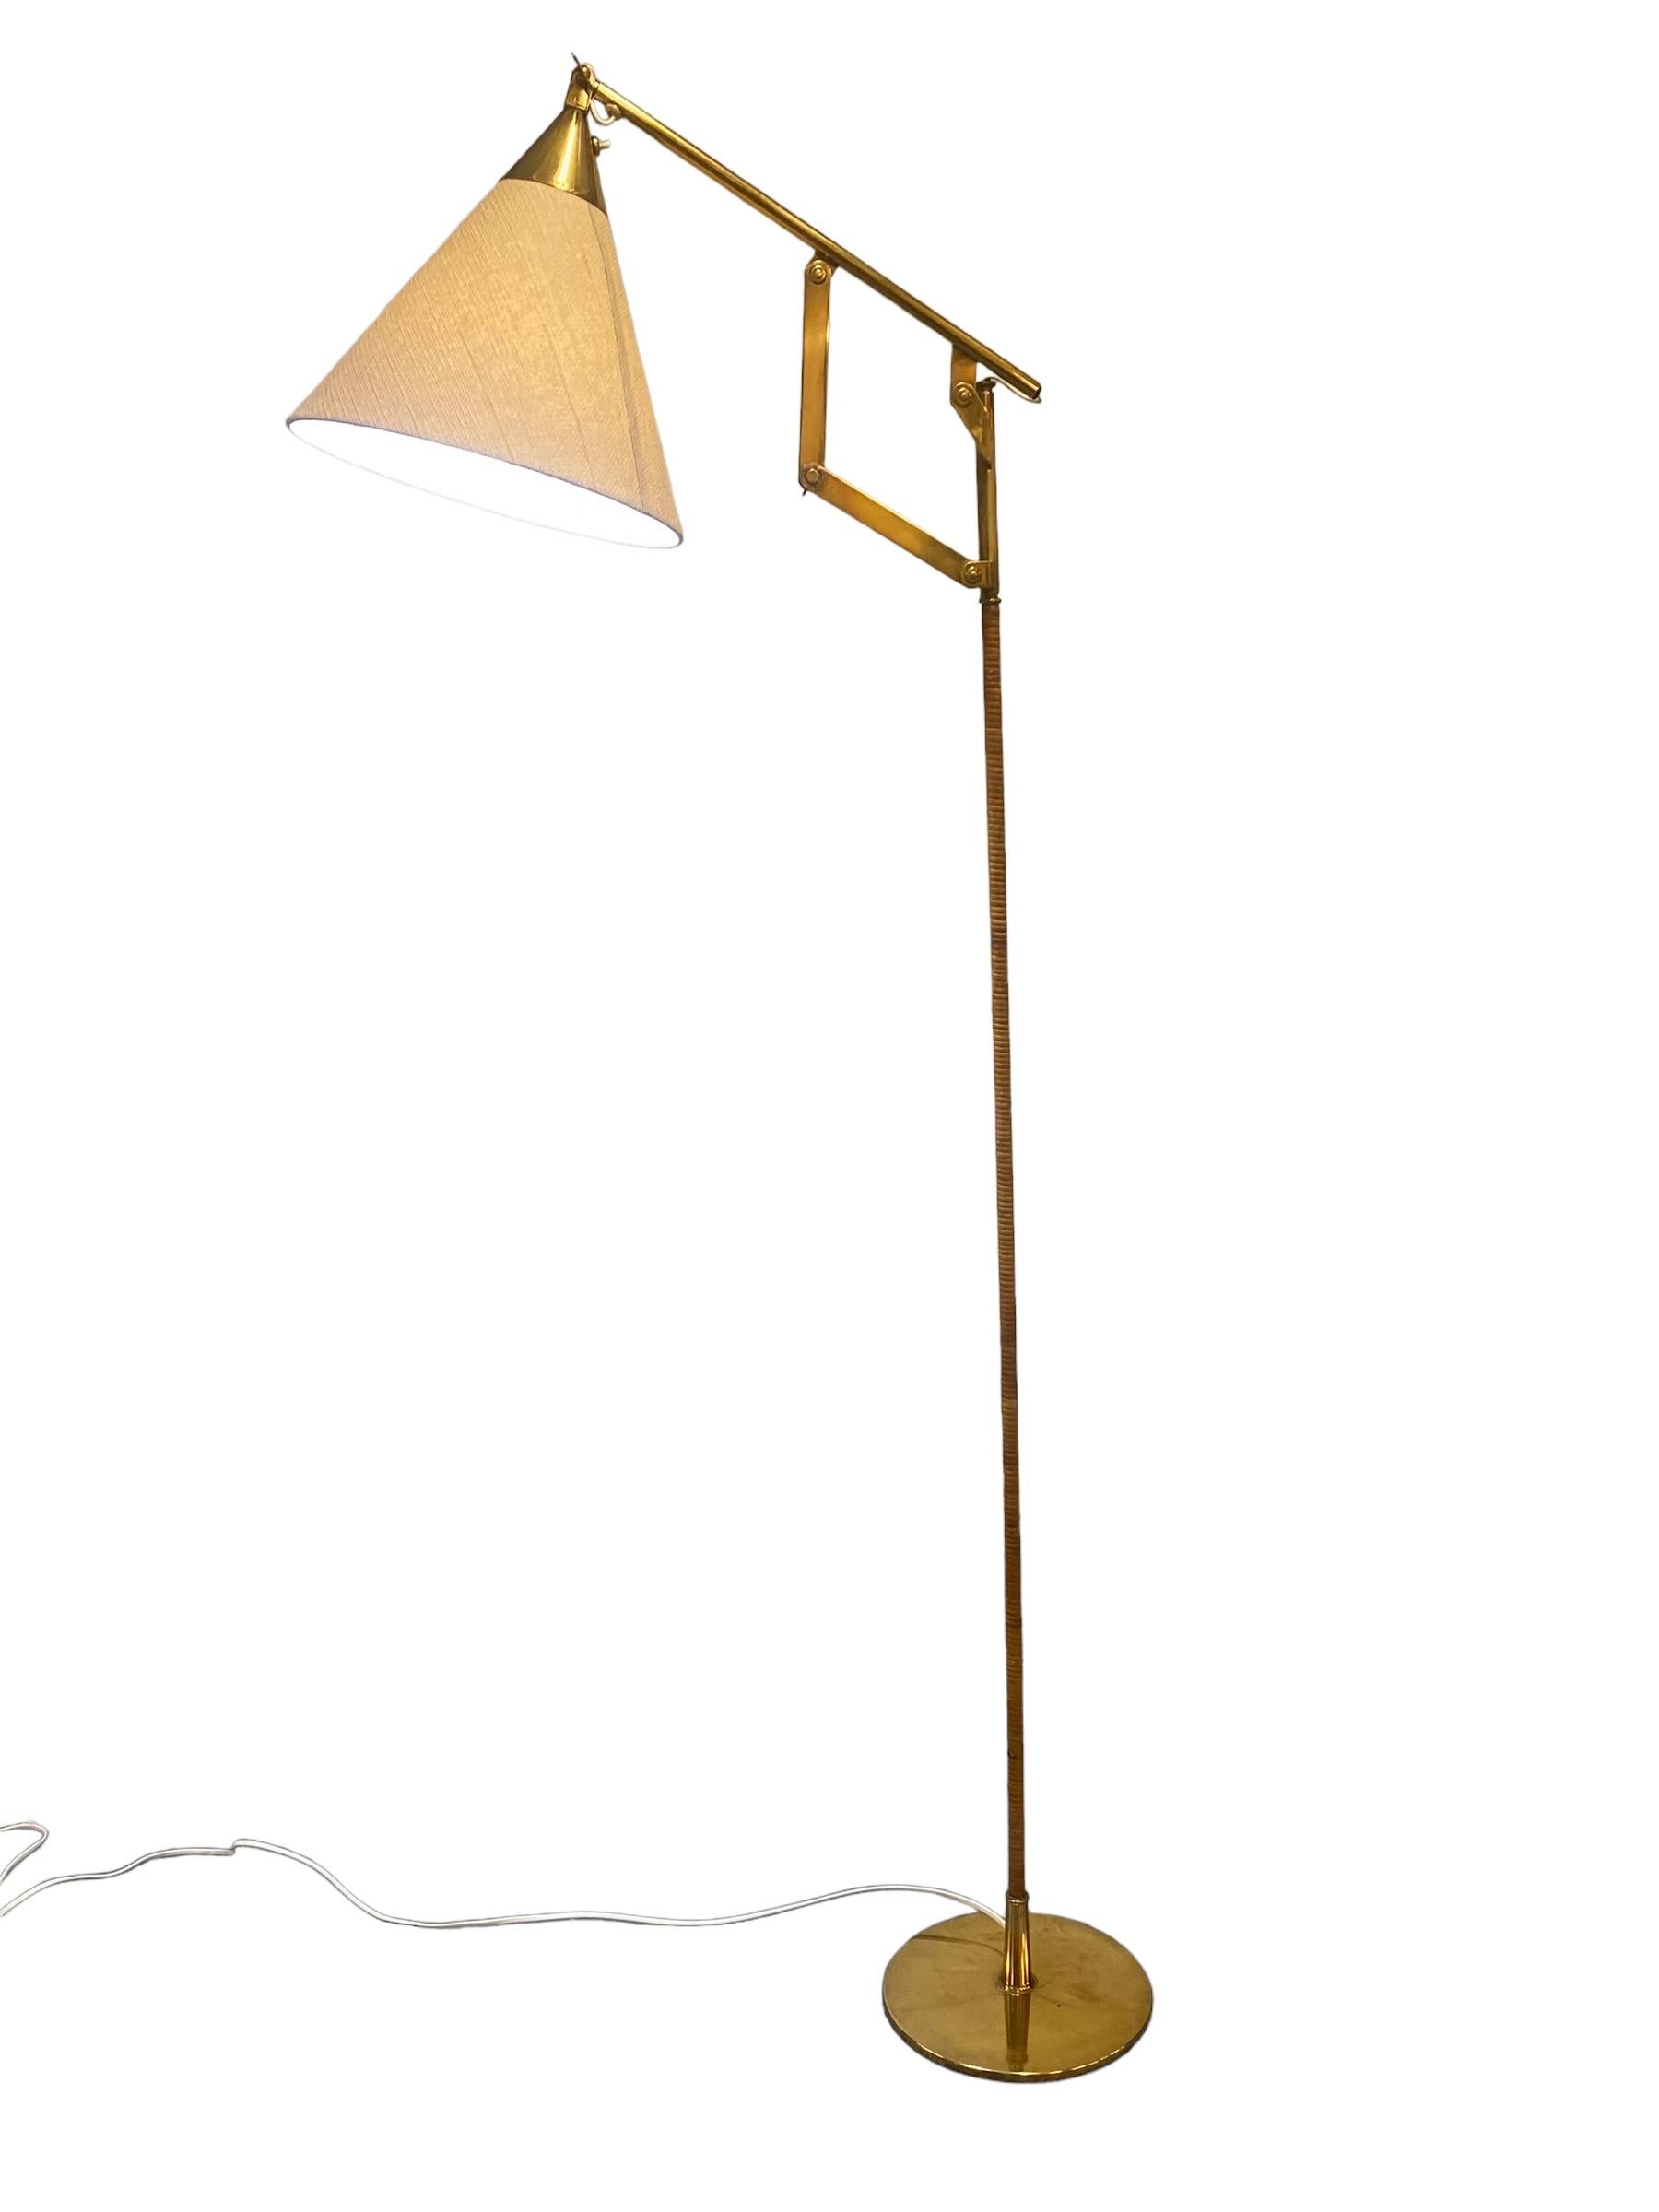 Finnish A Beautiful Paavo Tynell Floor Lamp Model 9605 for Taito Oy, 1950s  For Sale